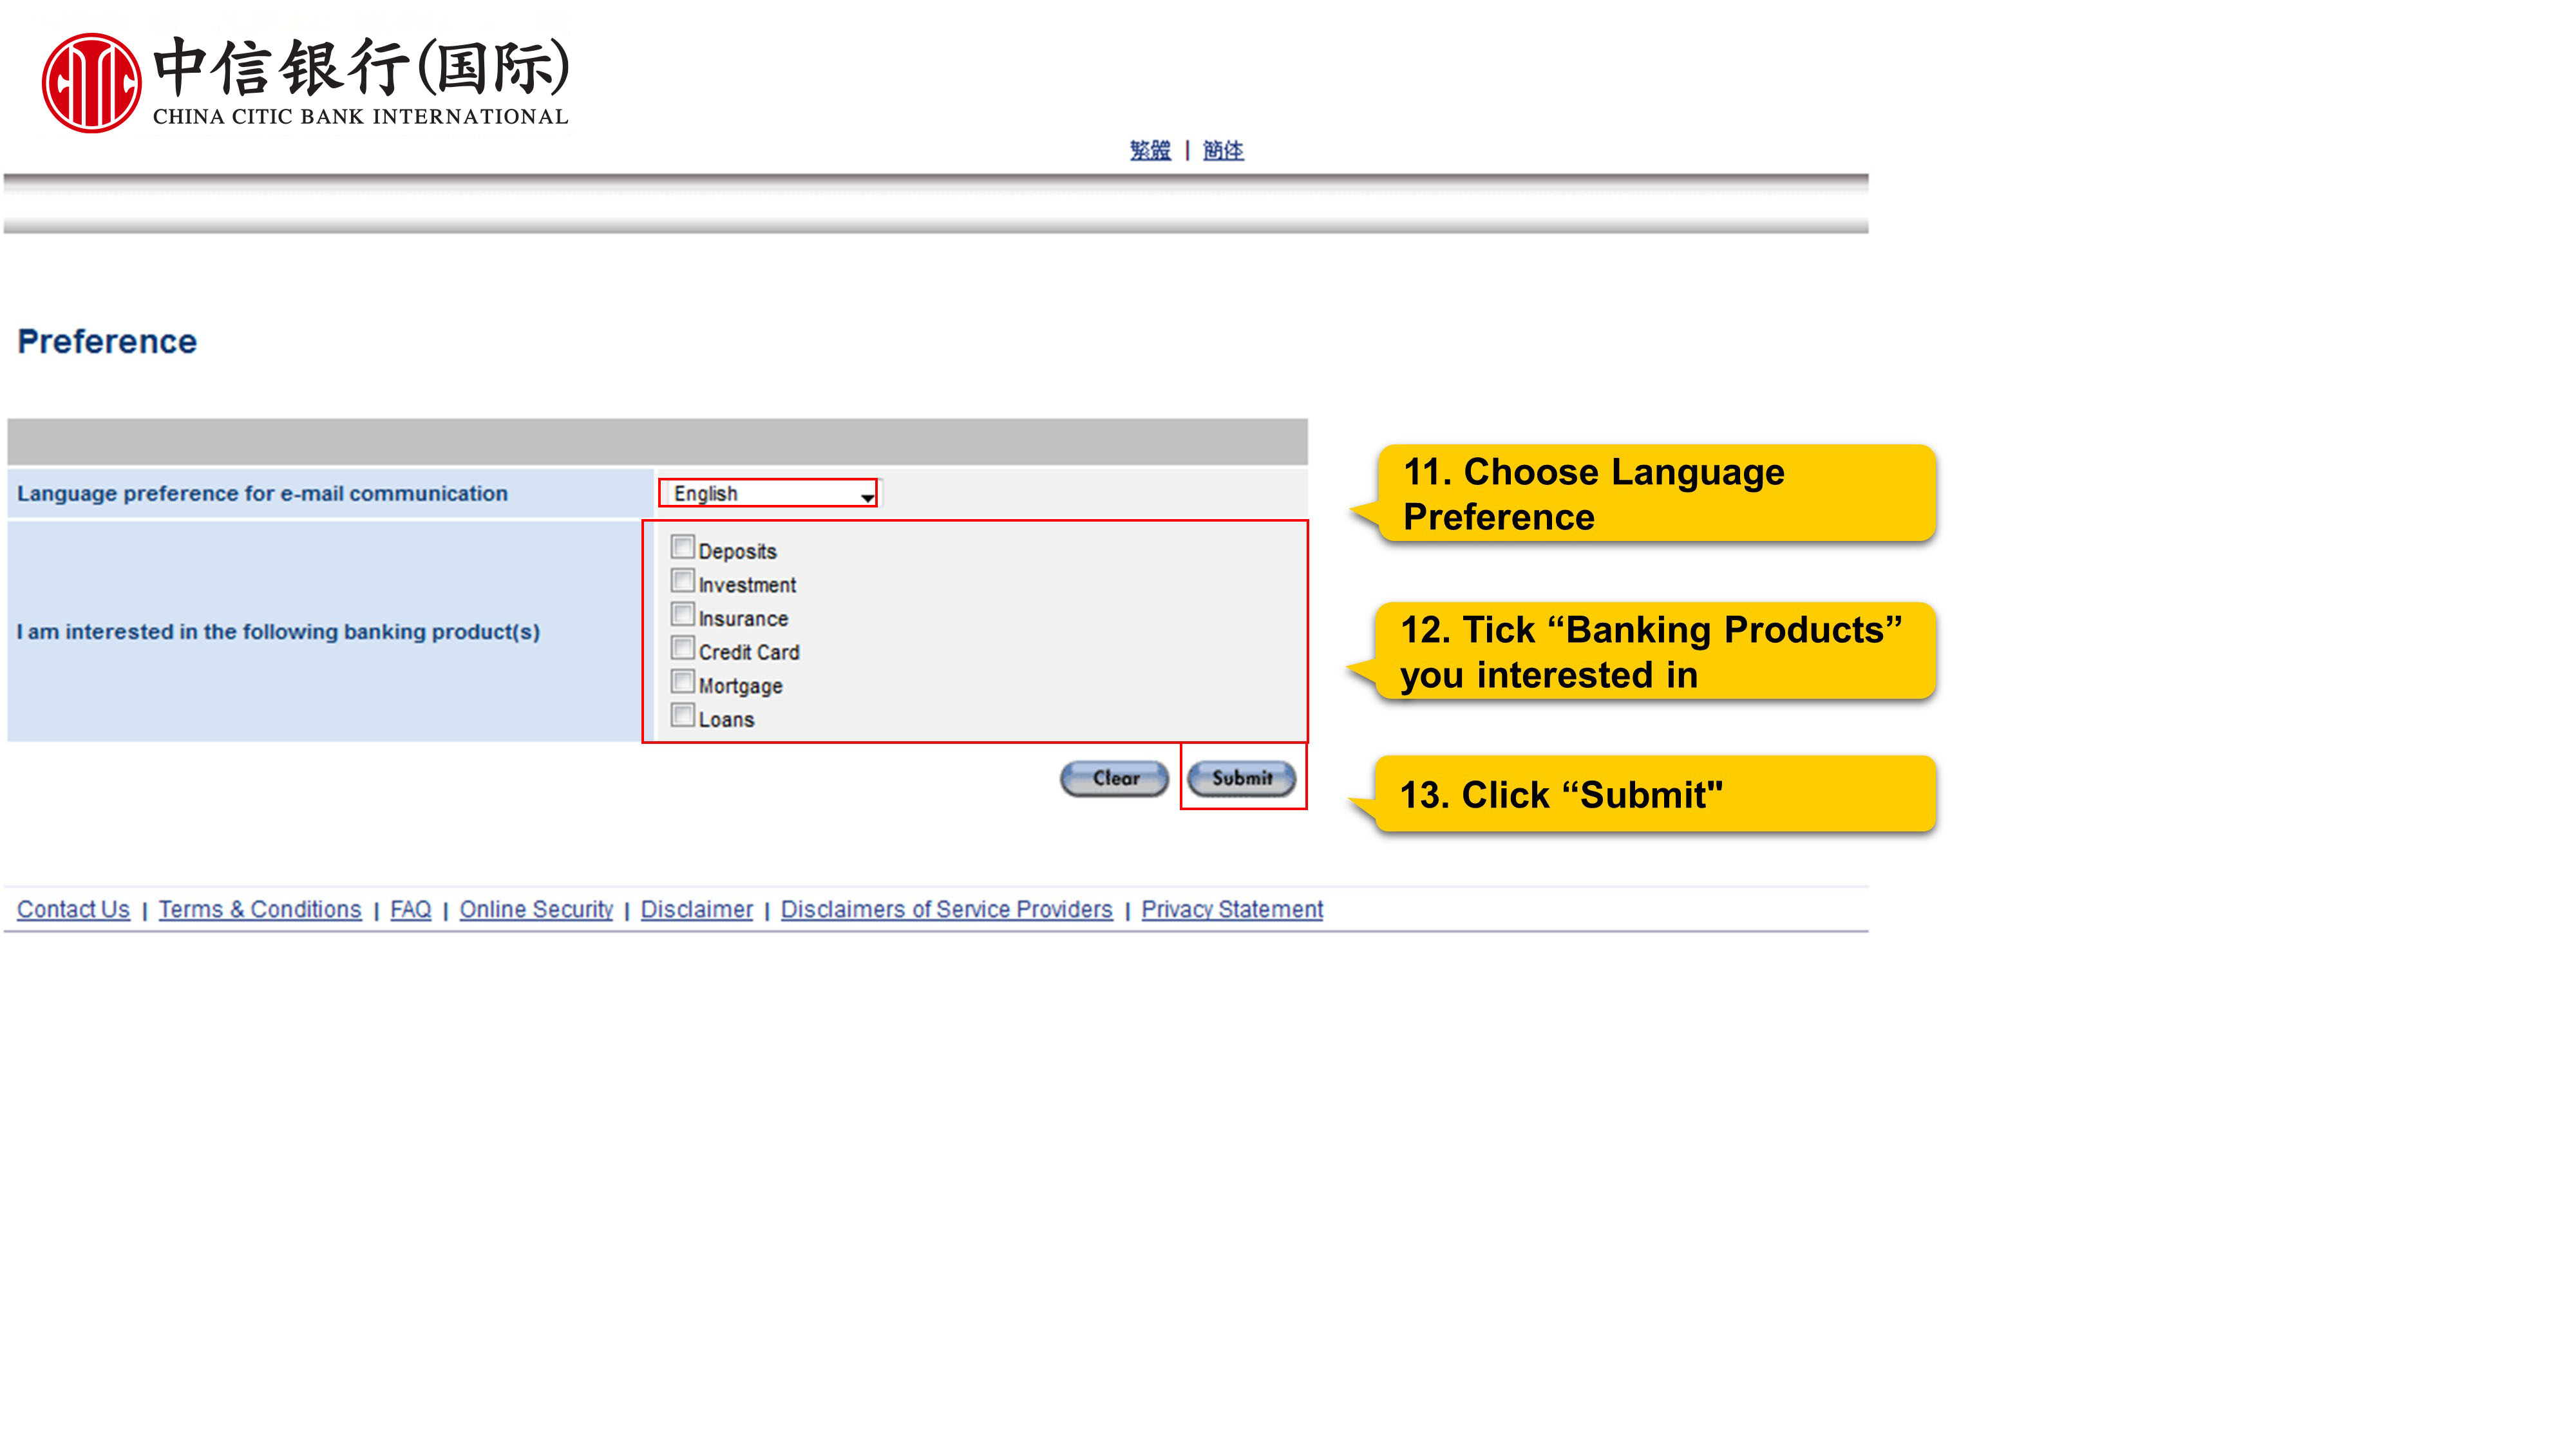 11. Choose Language Preference 12. Tick "Banking Products" you interested in 13. Click "Submit"